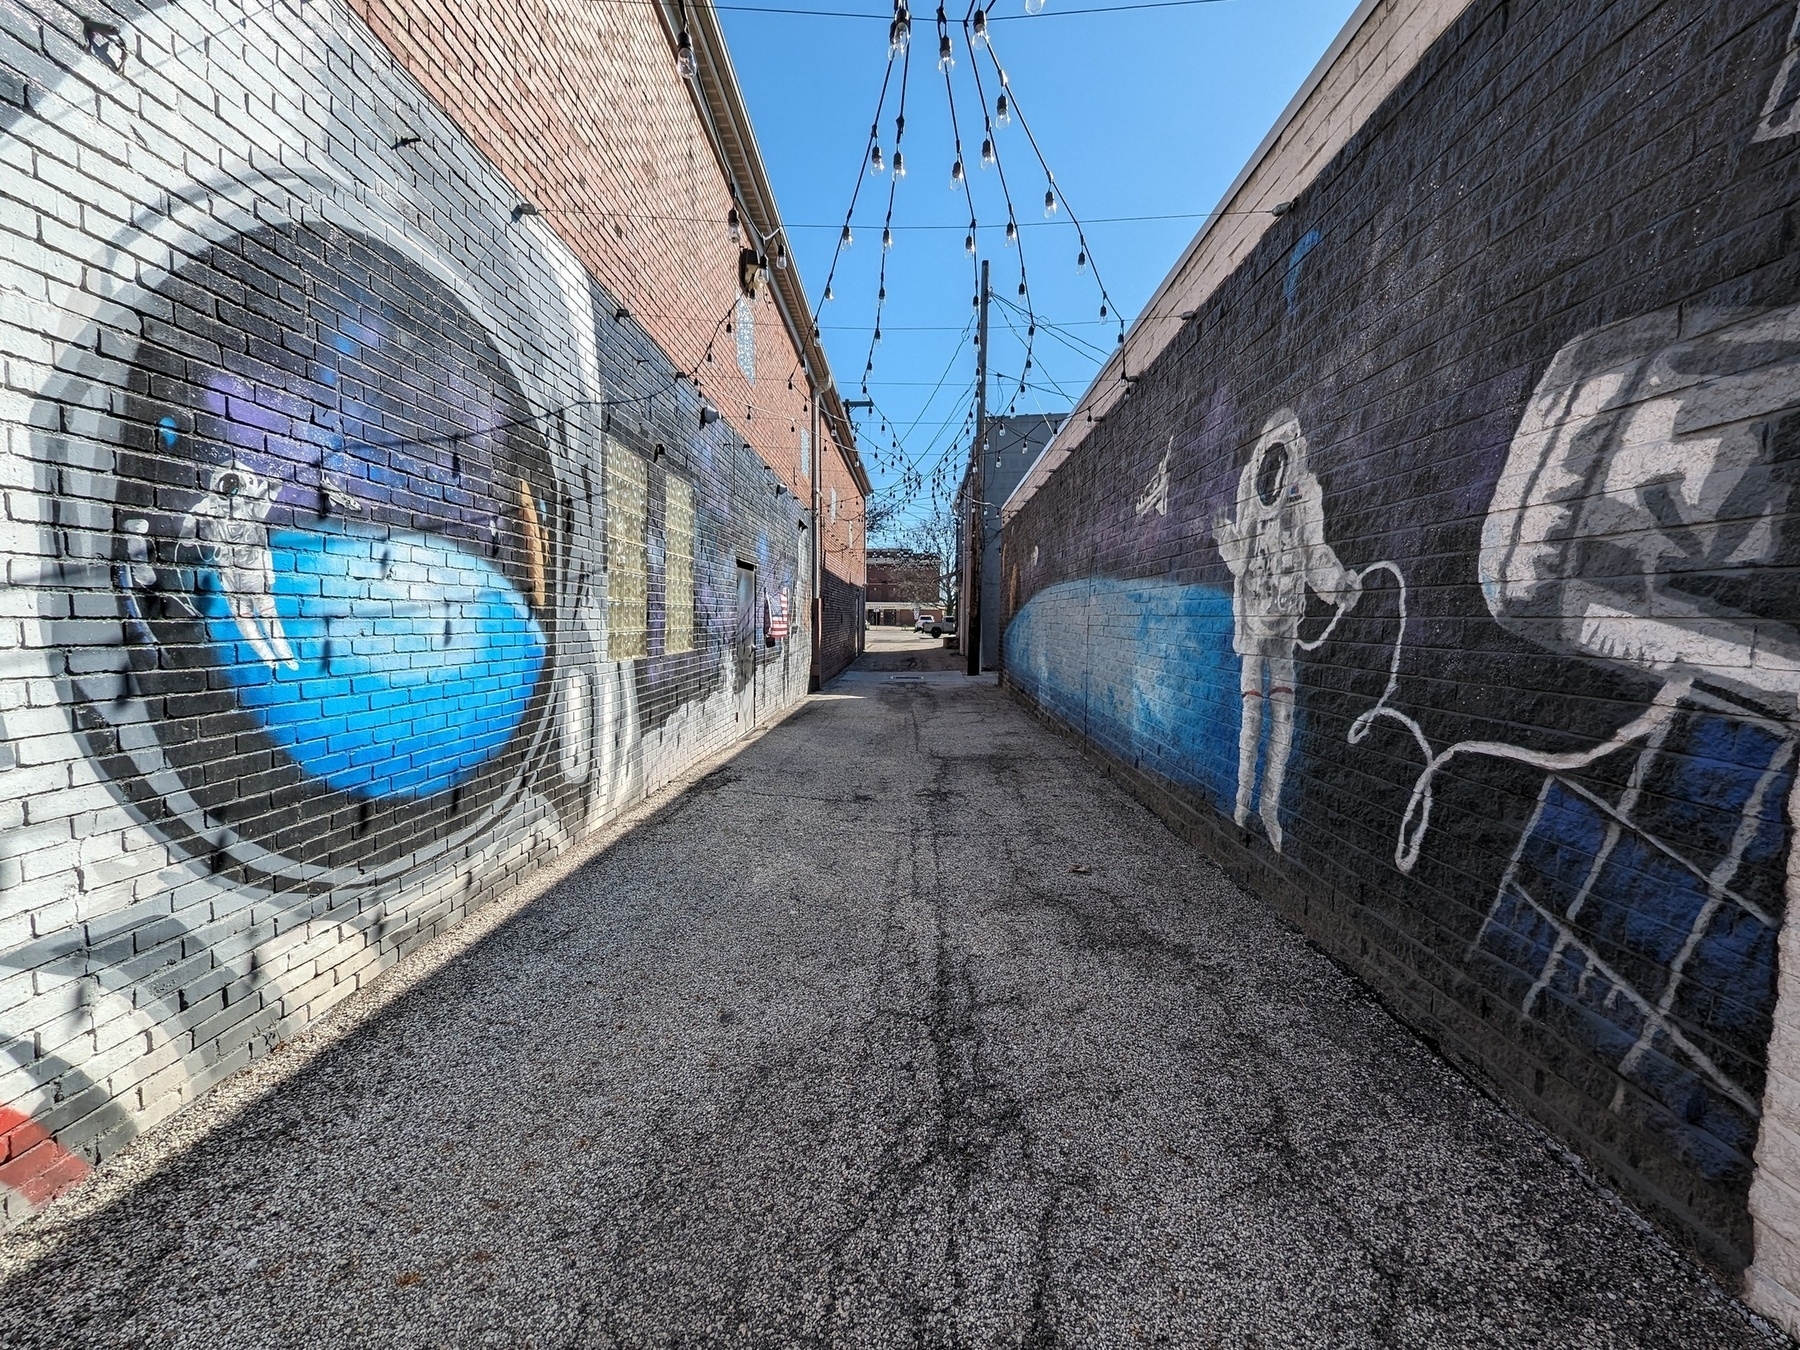 An alleyway with murals of astronauts in space flanking either side.